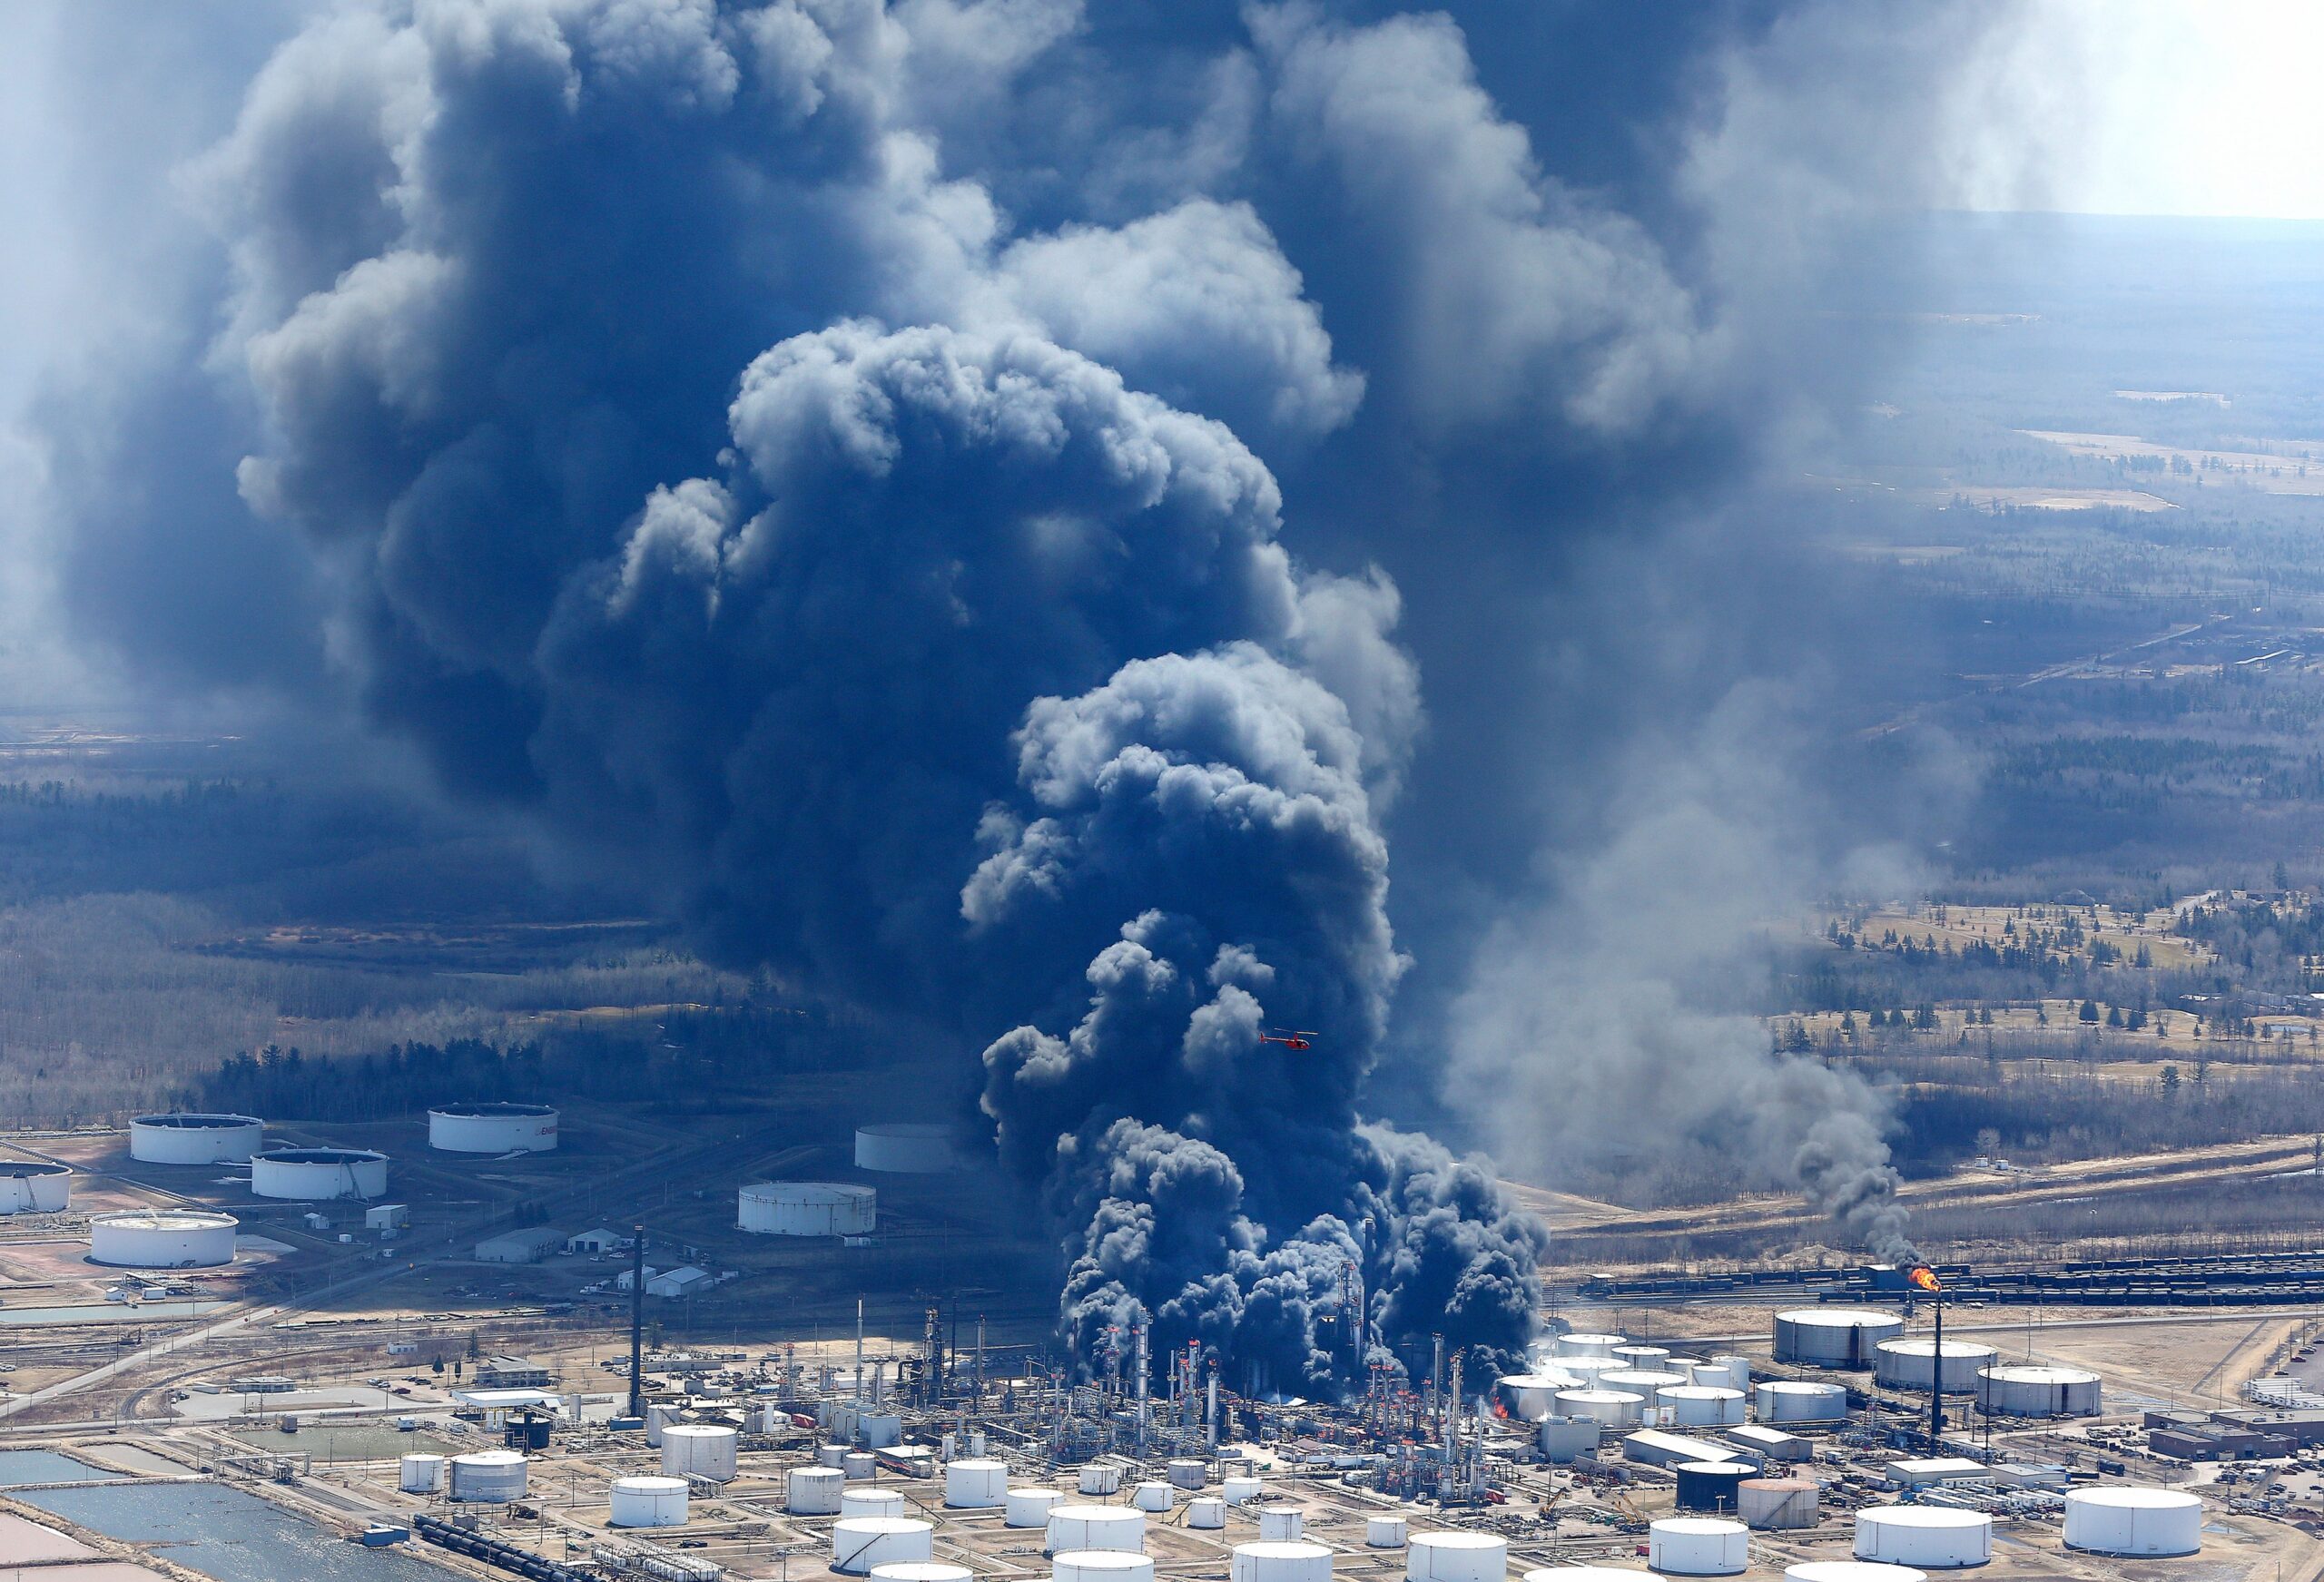 ‘This accident could have been avoided’: Years later, federal agency releases findings on Superior refinery explosion